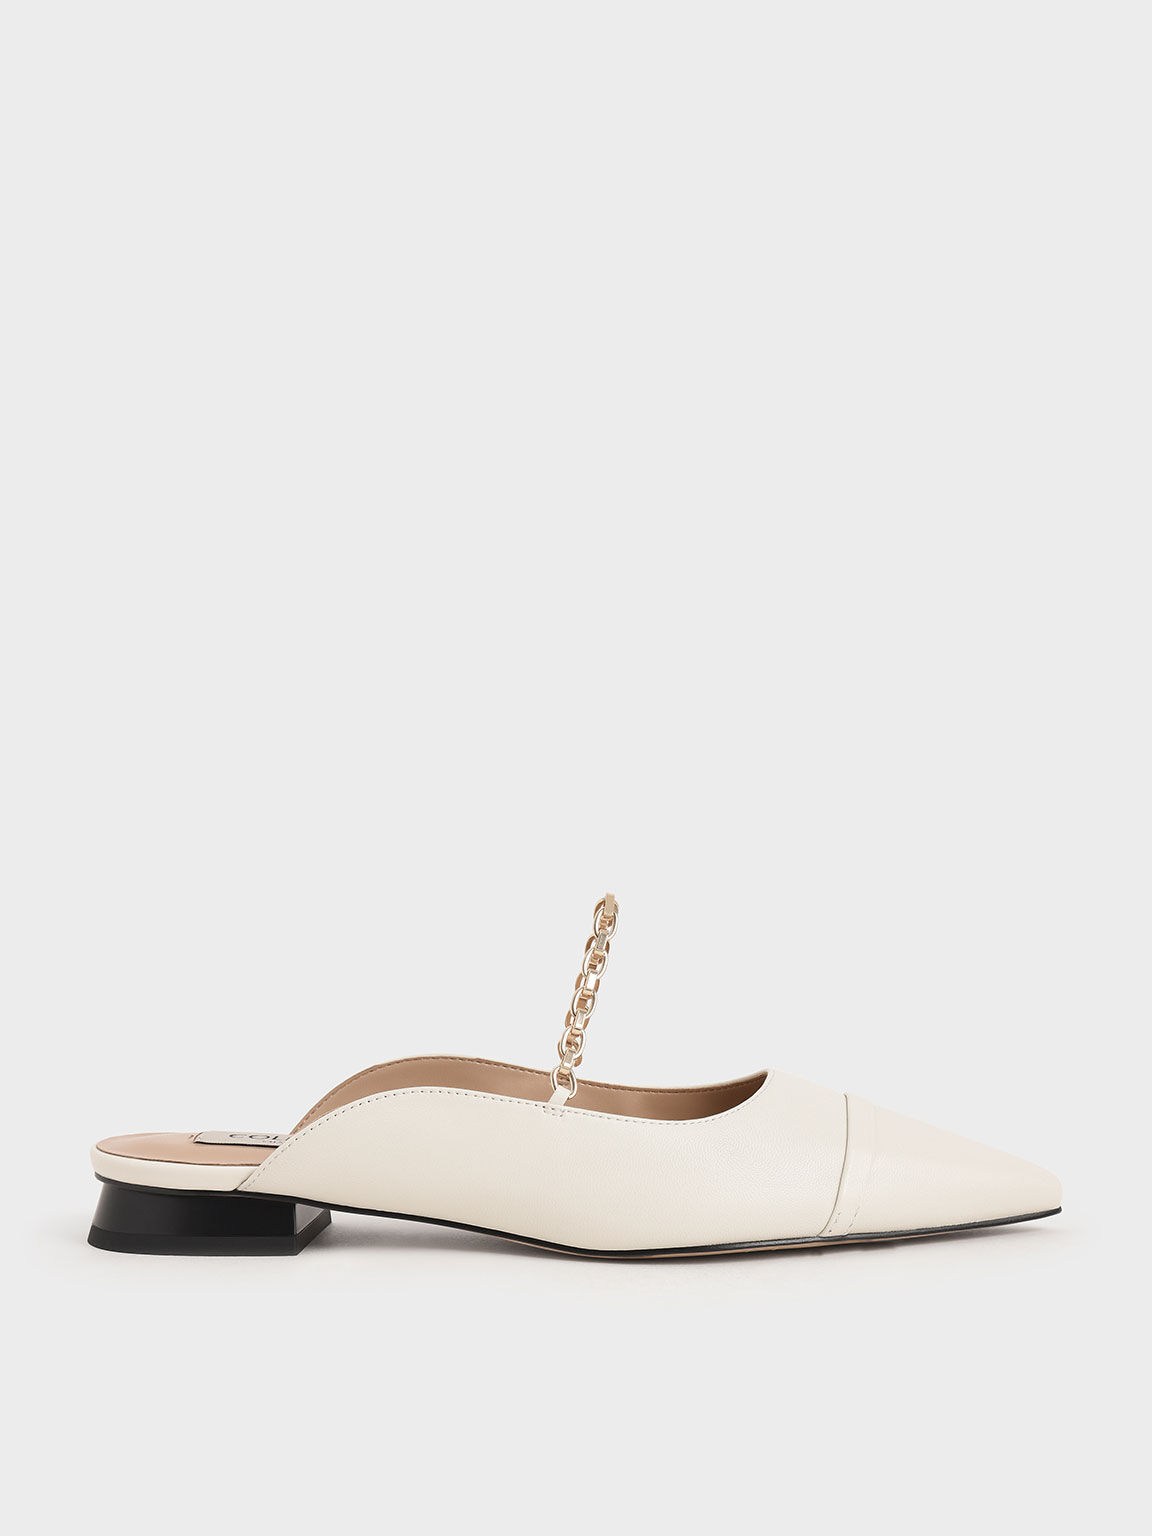 White Leather Chain Link Flat Mules 